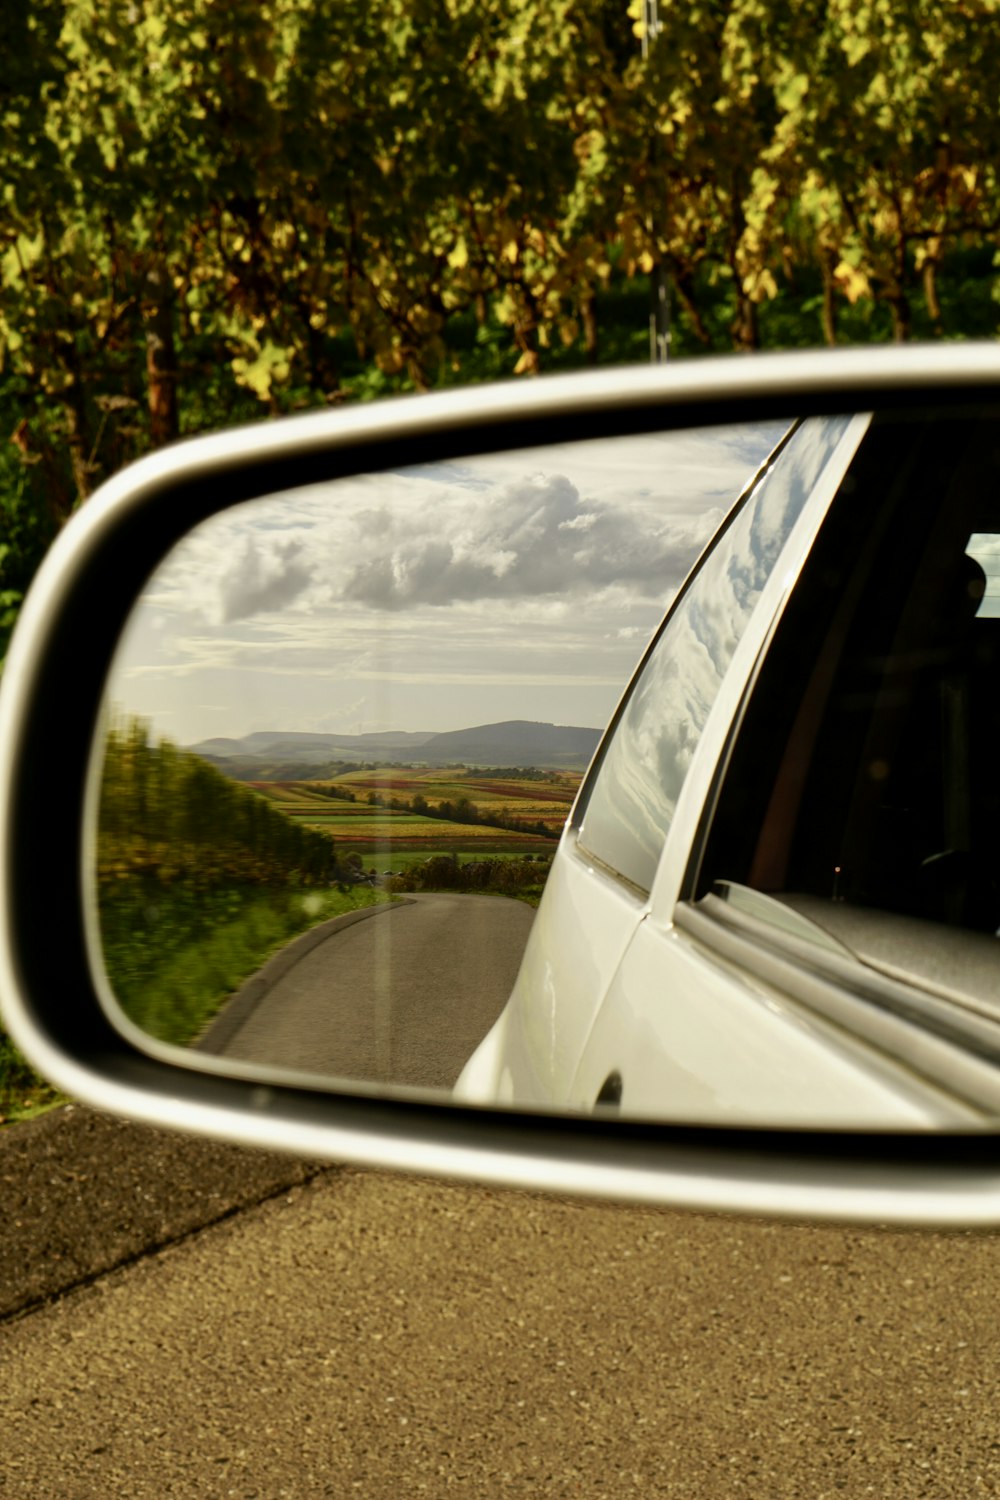 a side view mirror showing a car